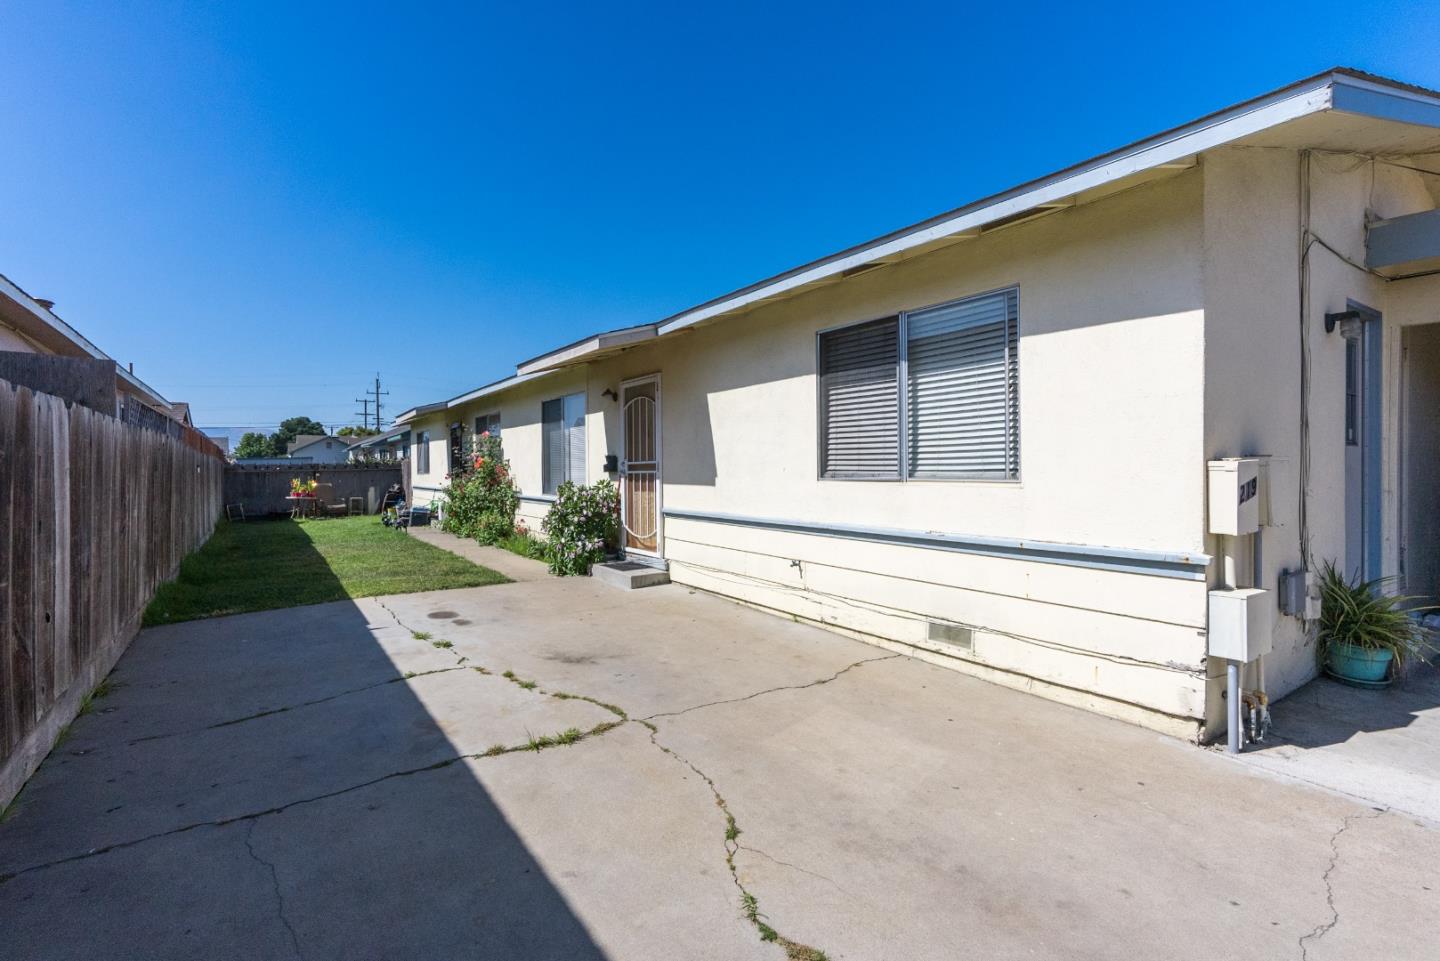 Photo of 217 W Curtis St in Salinas, CA